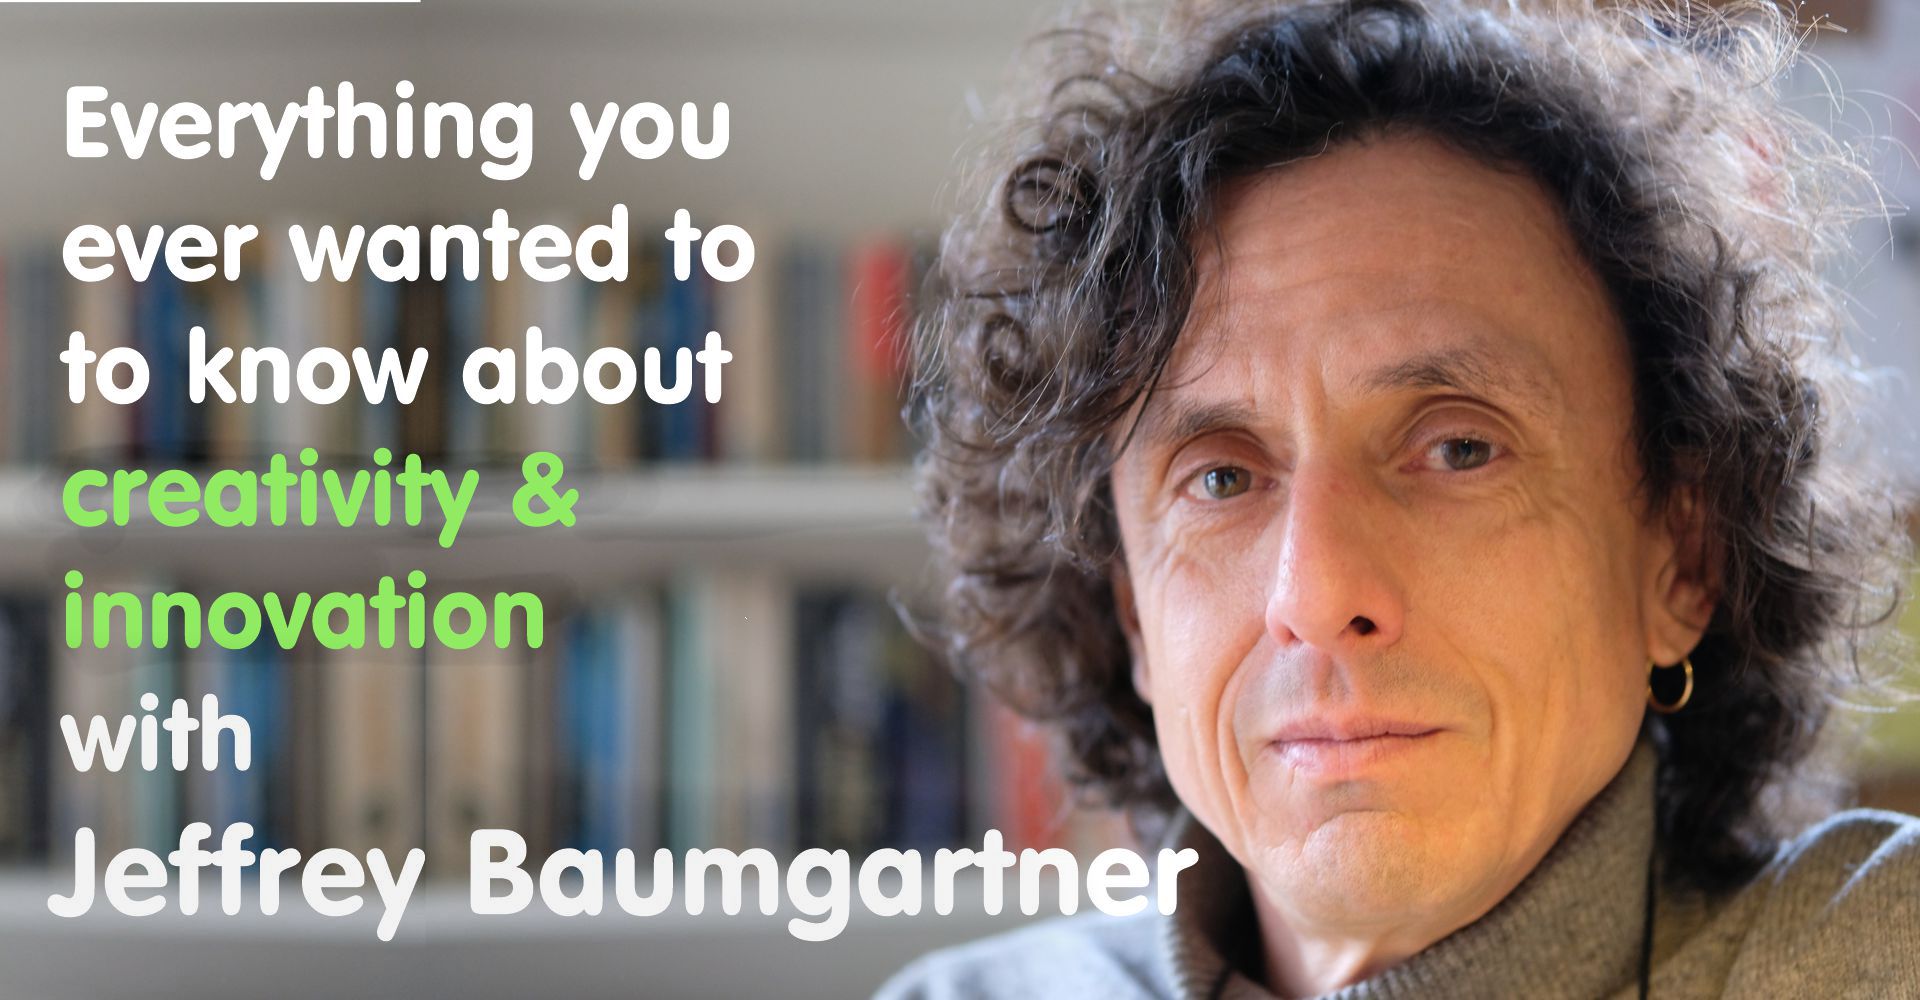 Everything you ever wanted to know about creativity and innovation - with Jeffrey Baumgartner